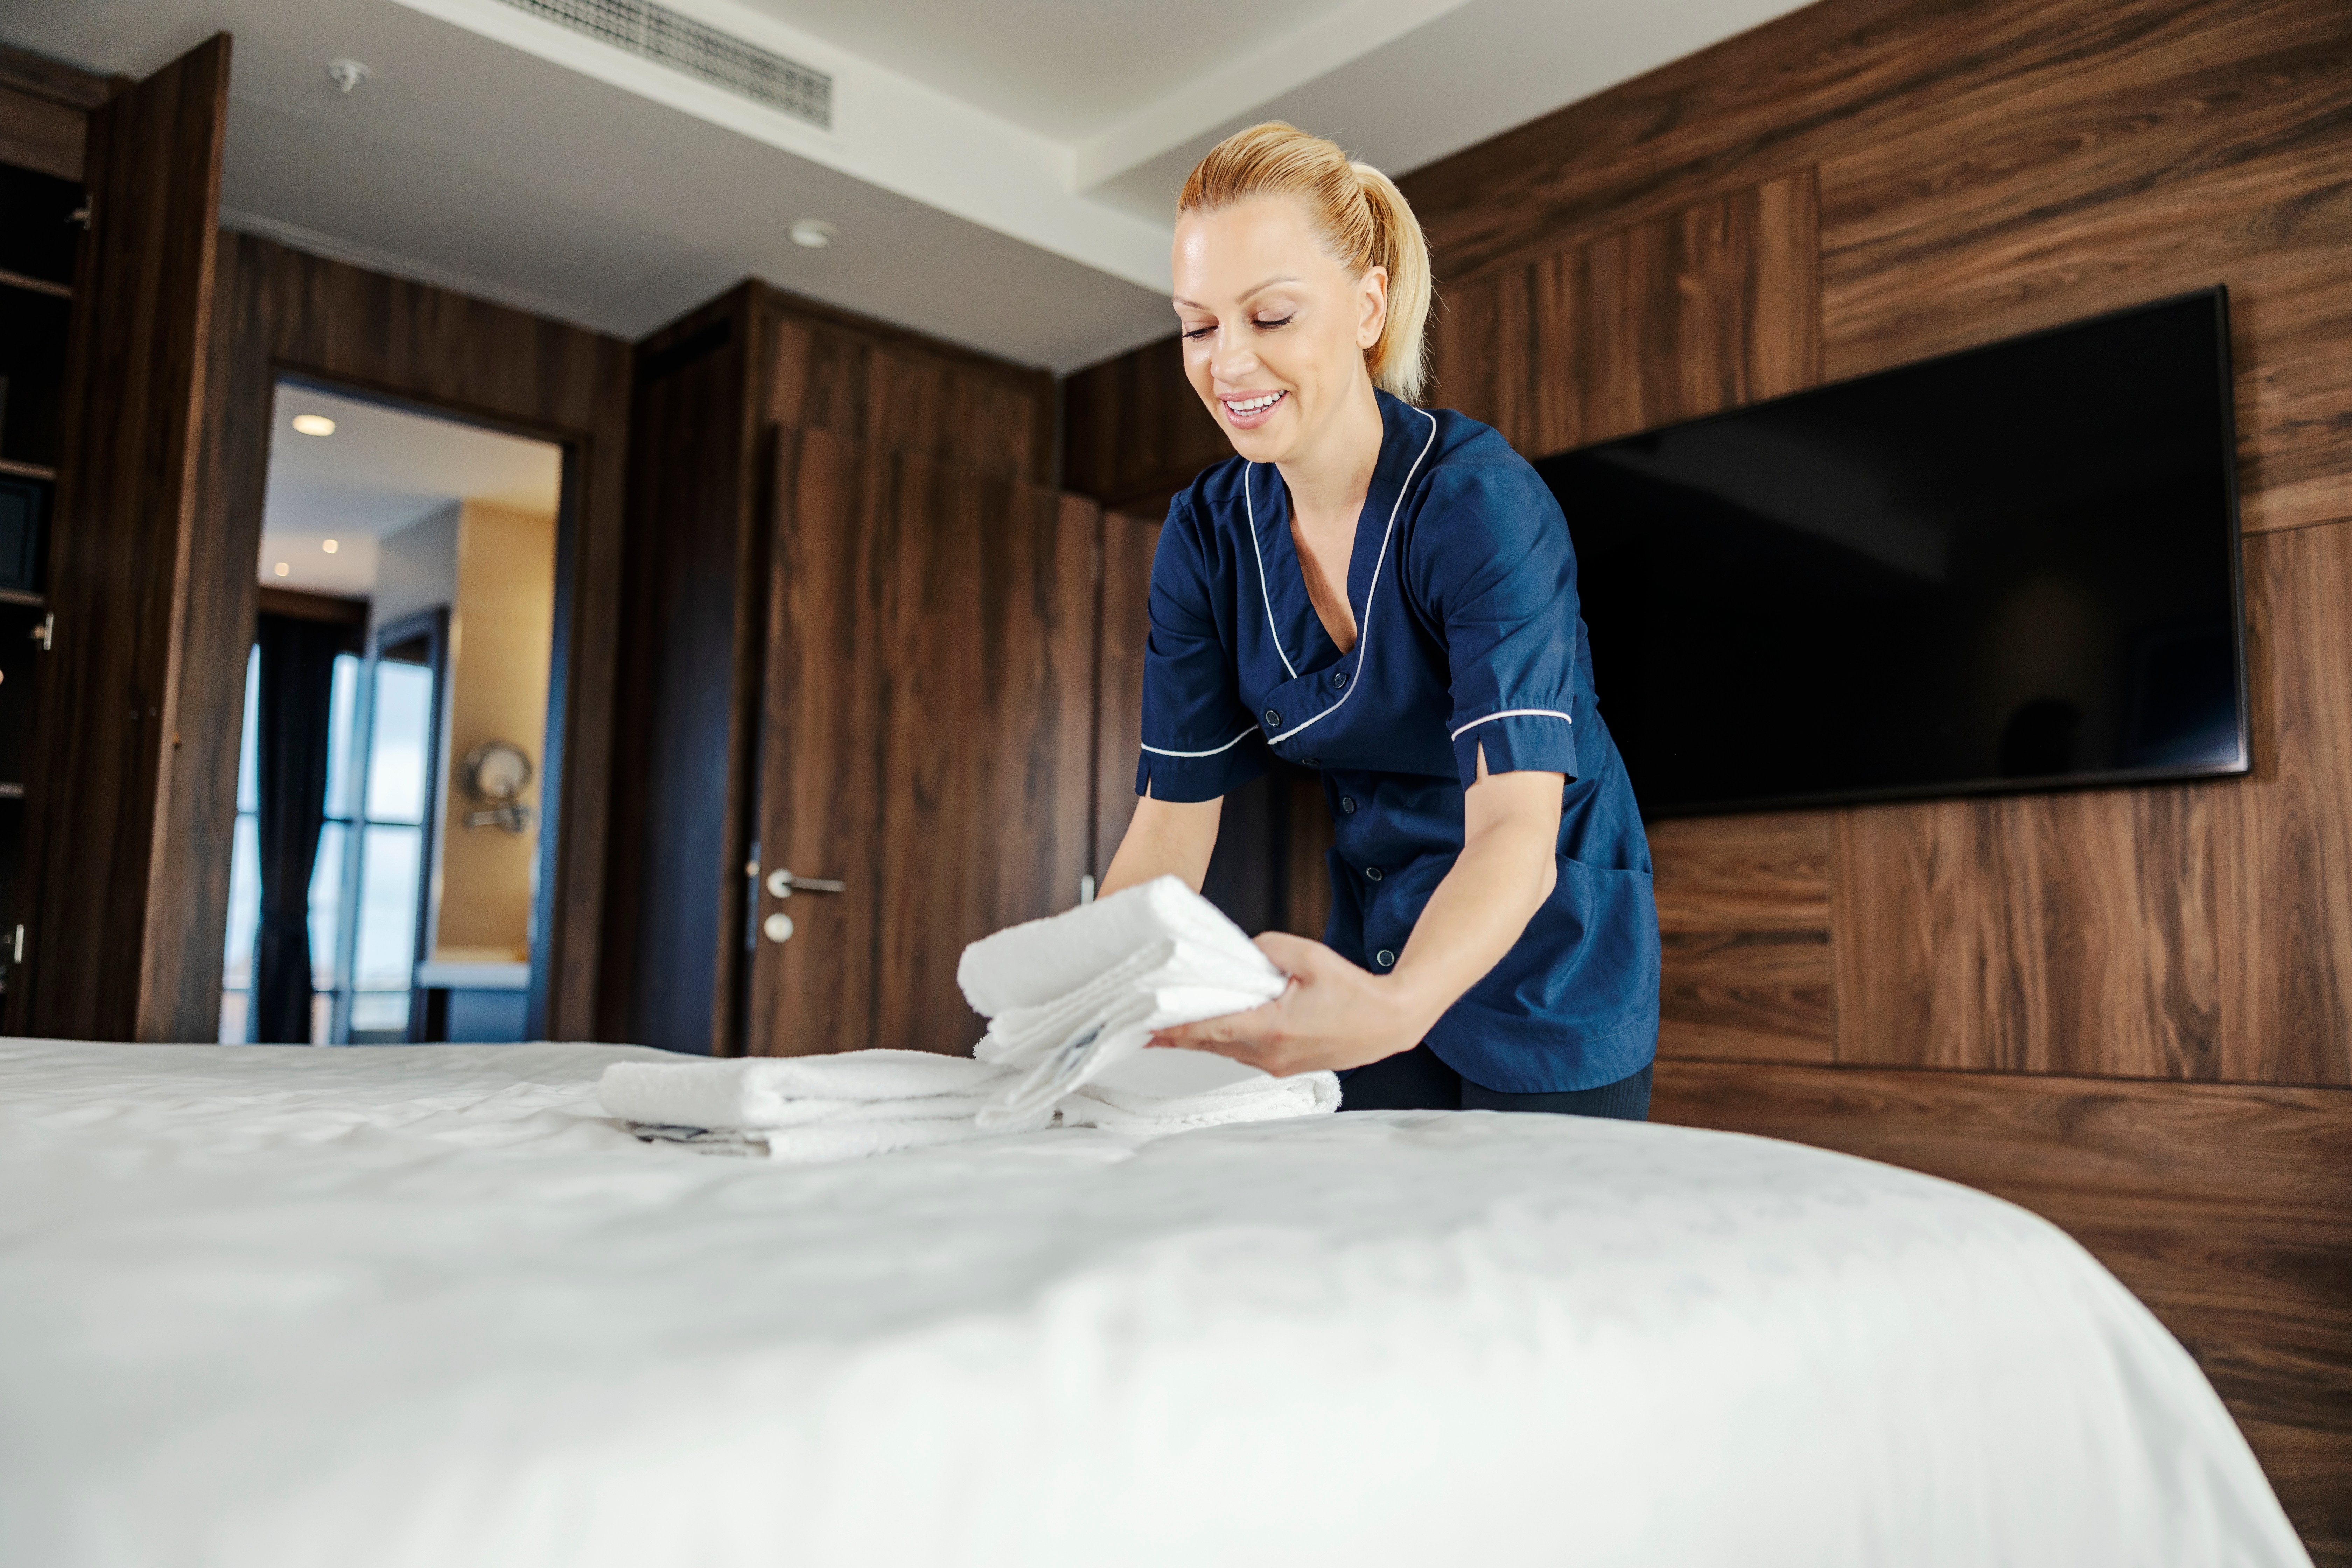 A female staff worker putting clean towels on a bed in a hotel room | Source: Shutterstock